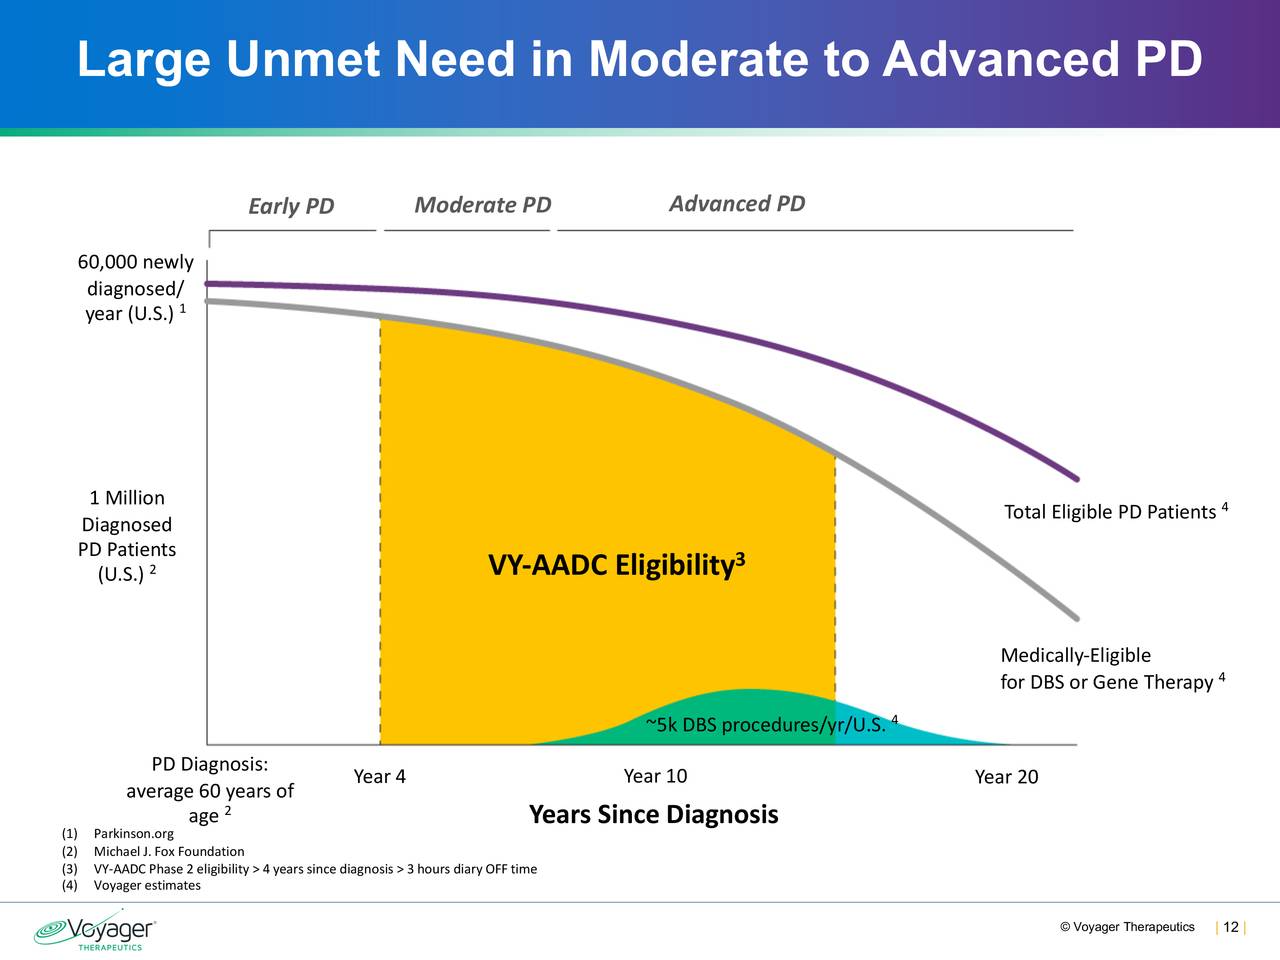 Large Unmet Need in Moderate to Advanced PD